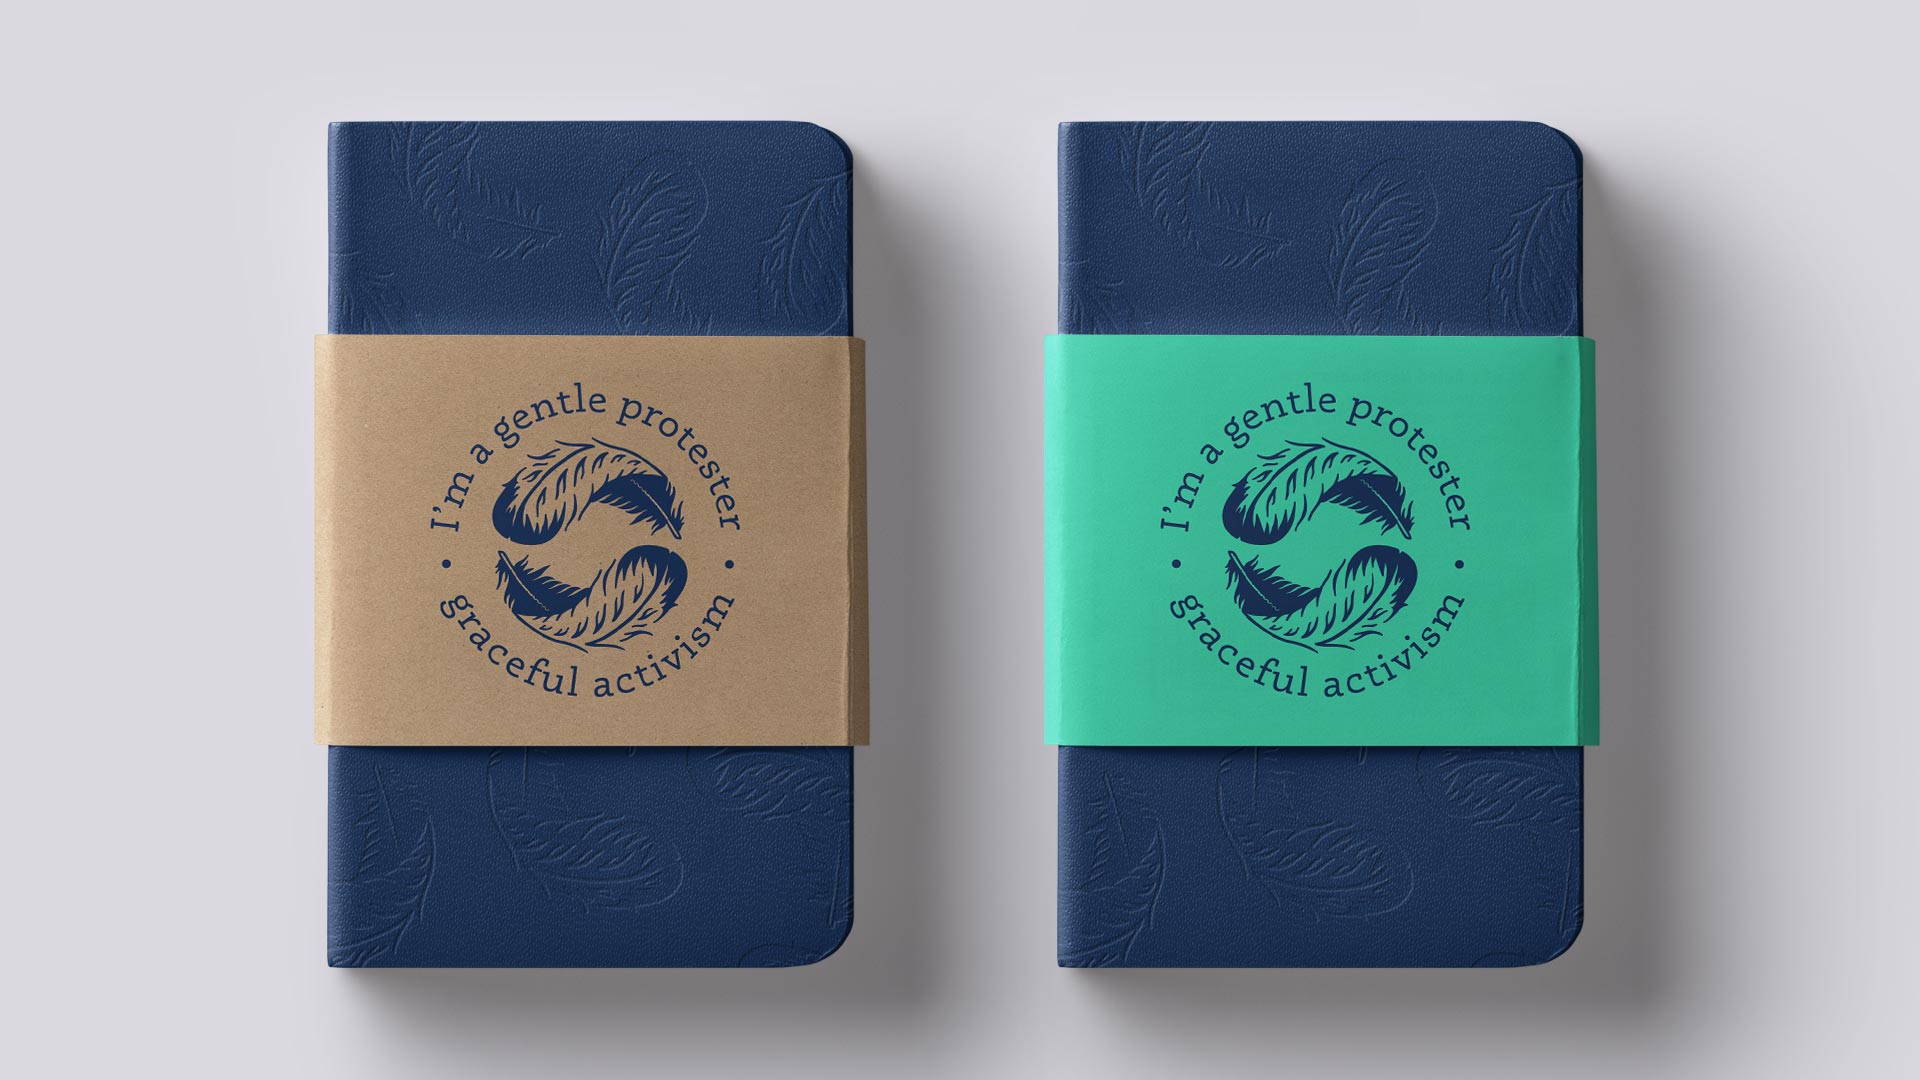 Home Of Gentle Protest Note Books